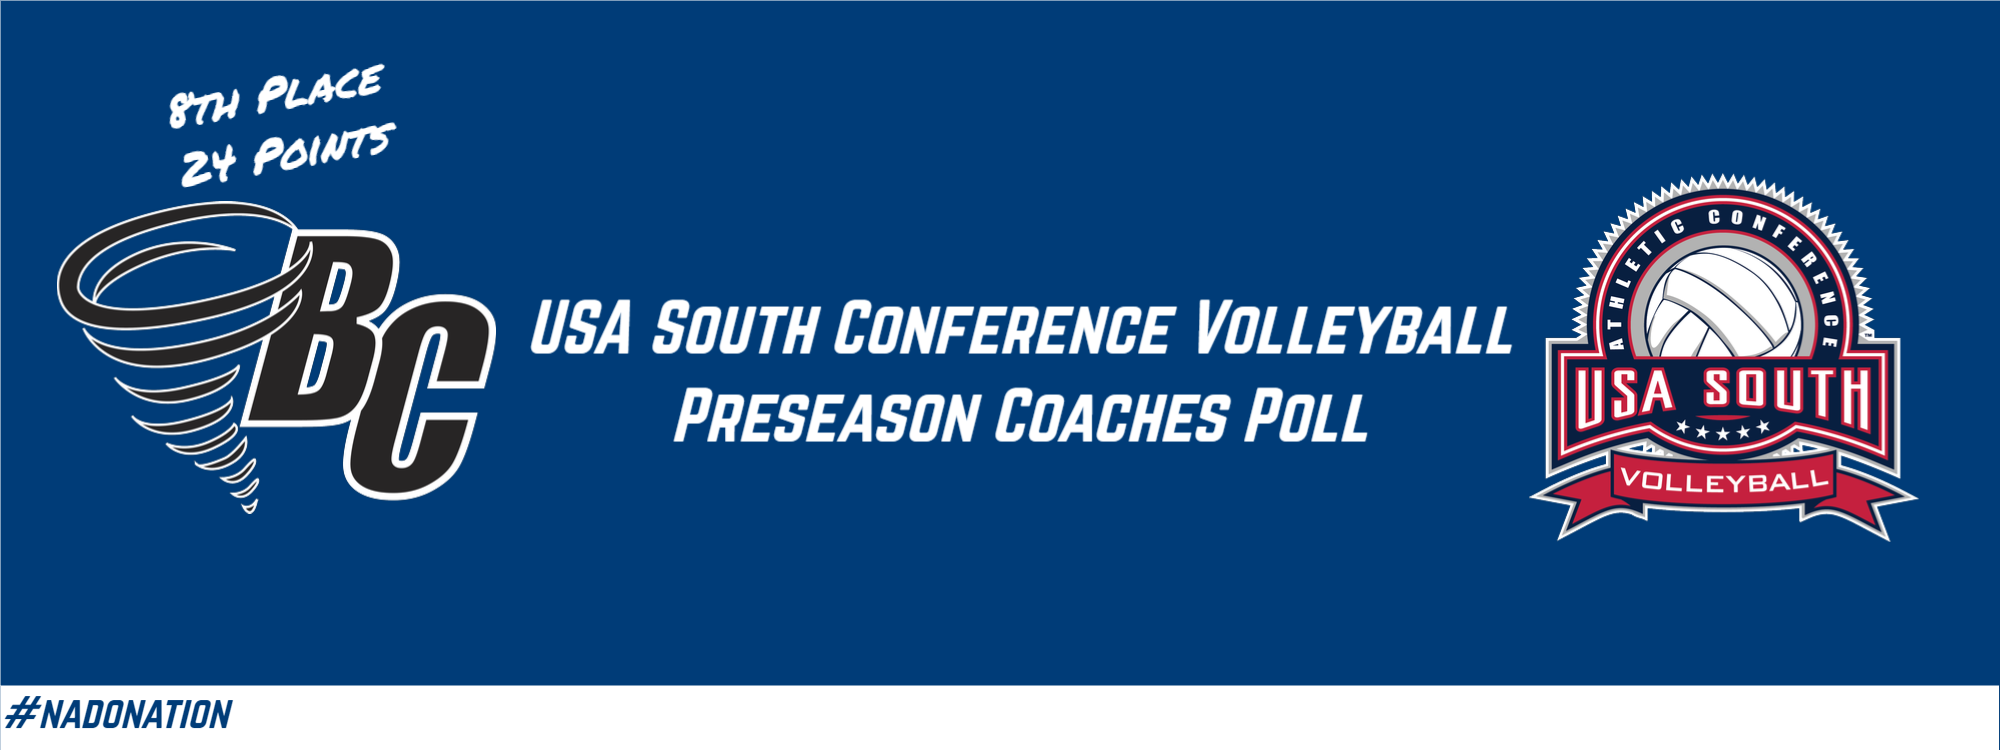 USA South Releases 2022 Volleyball Preseason Coaches Poll